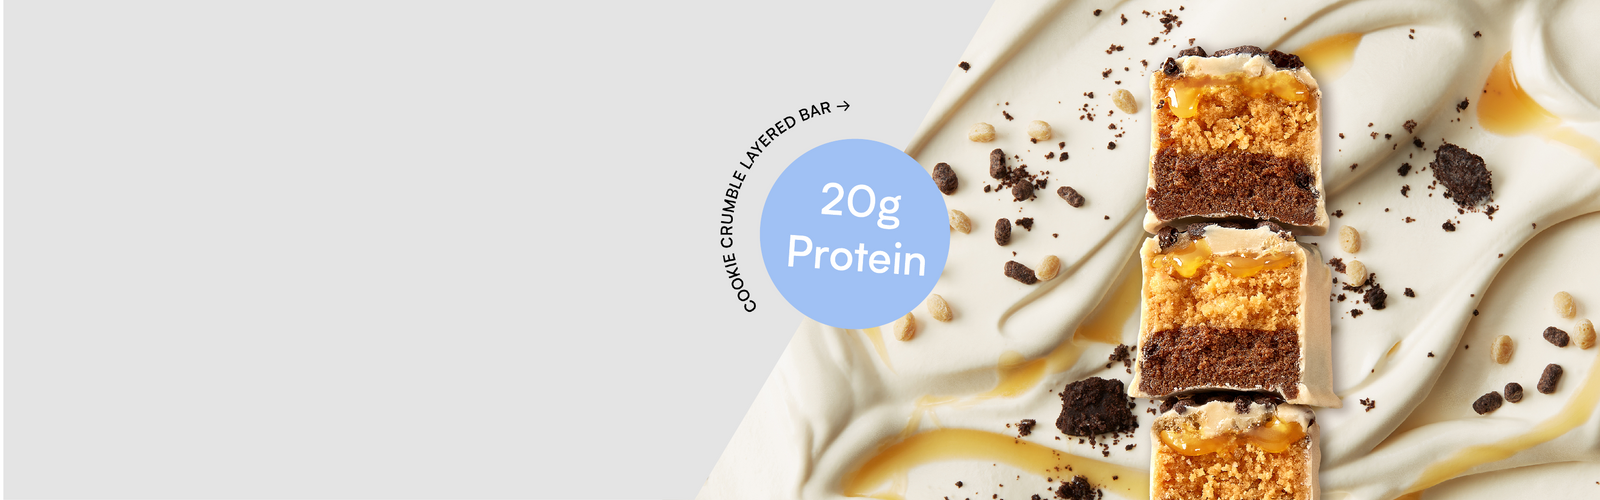 Heathy snacks from Myprotein featuring the new cookie crumbed layered bar with 20g of protein.